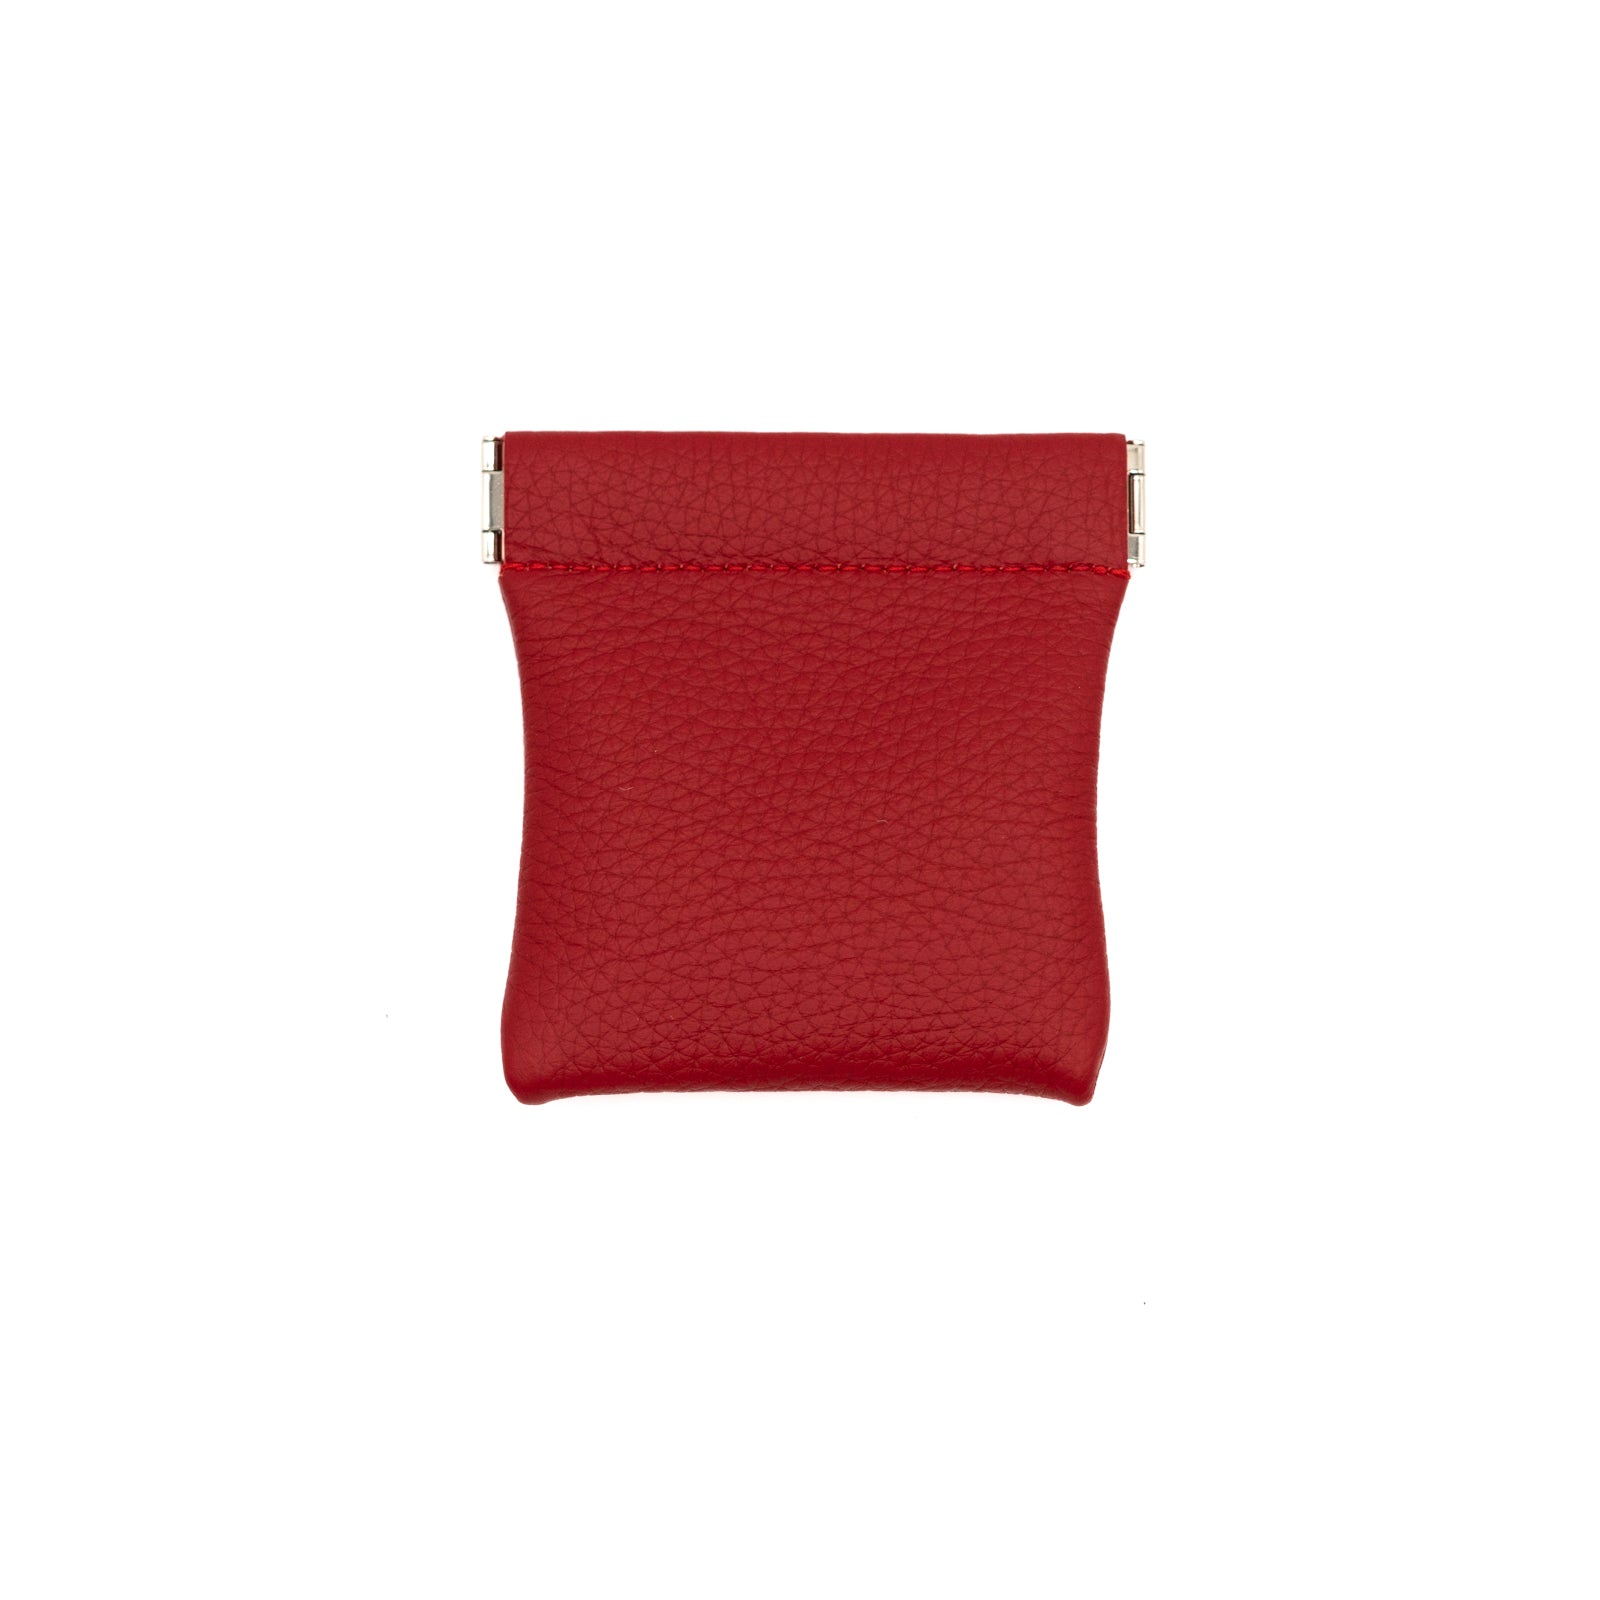 [Service item] Square spring mouth pouch S / Cuir Marsh